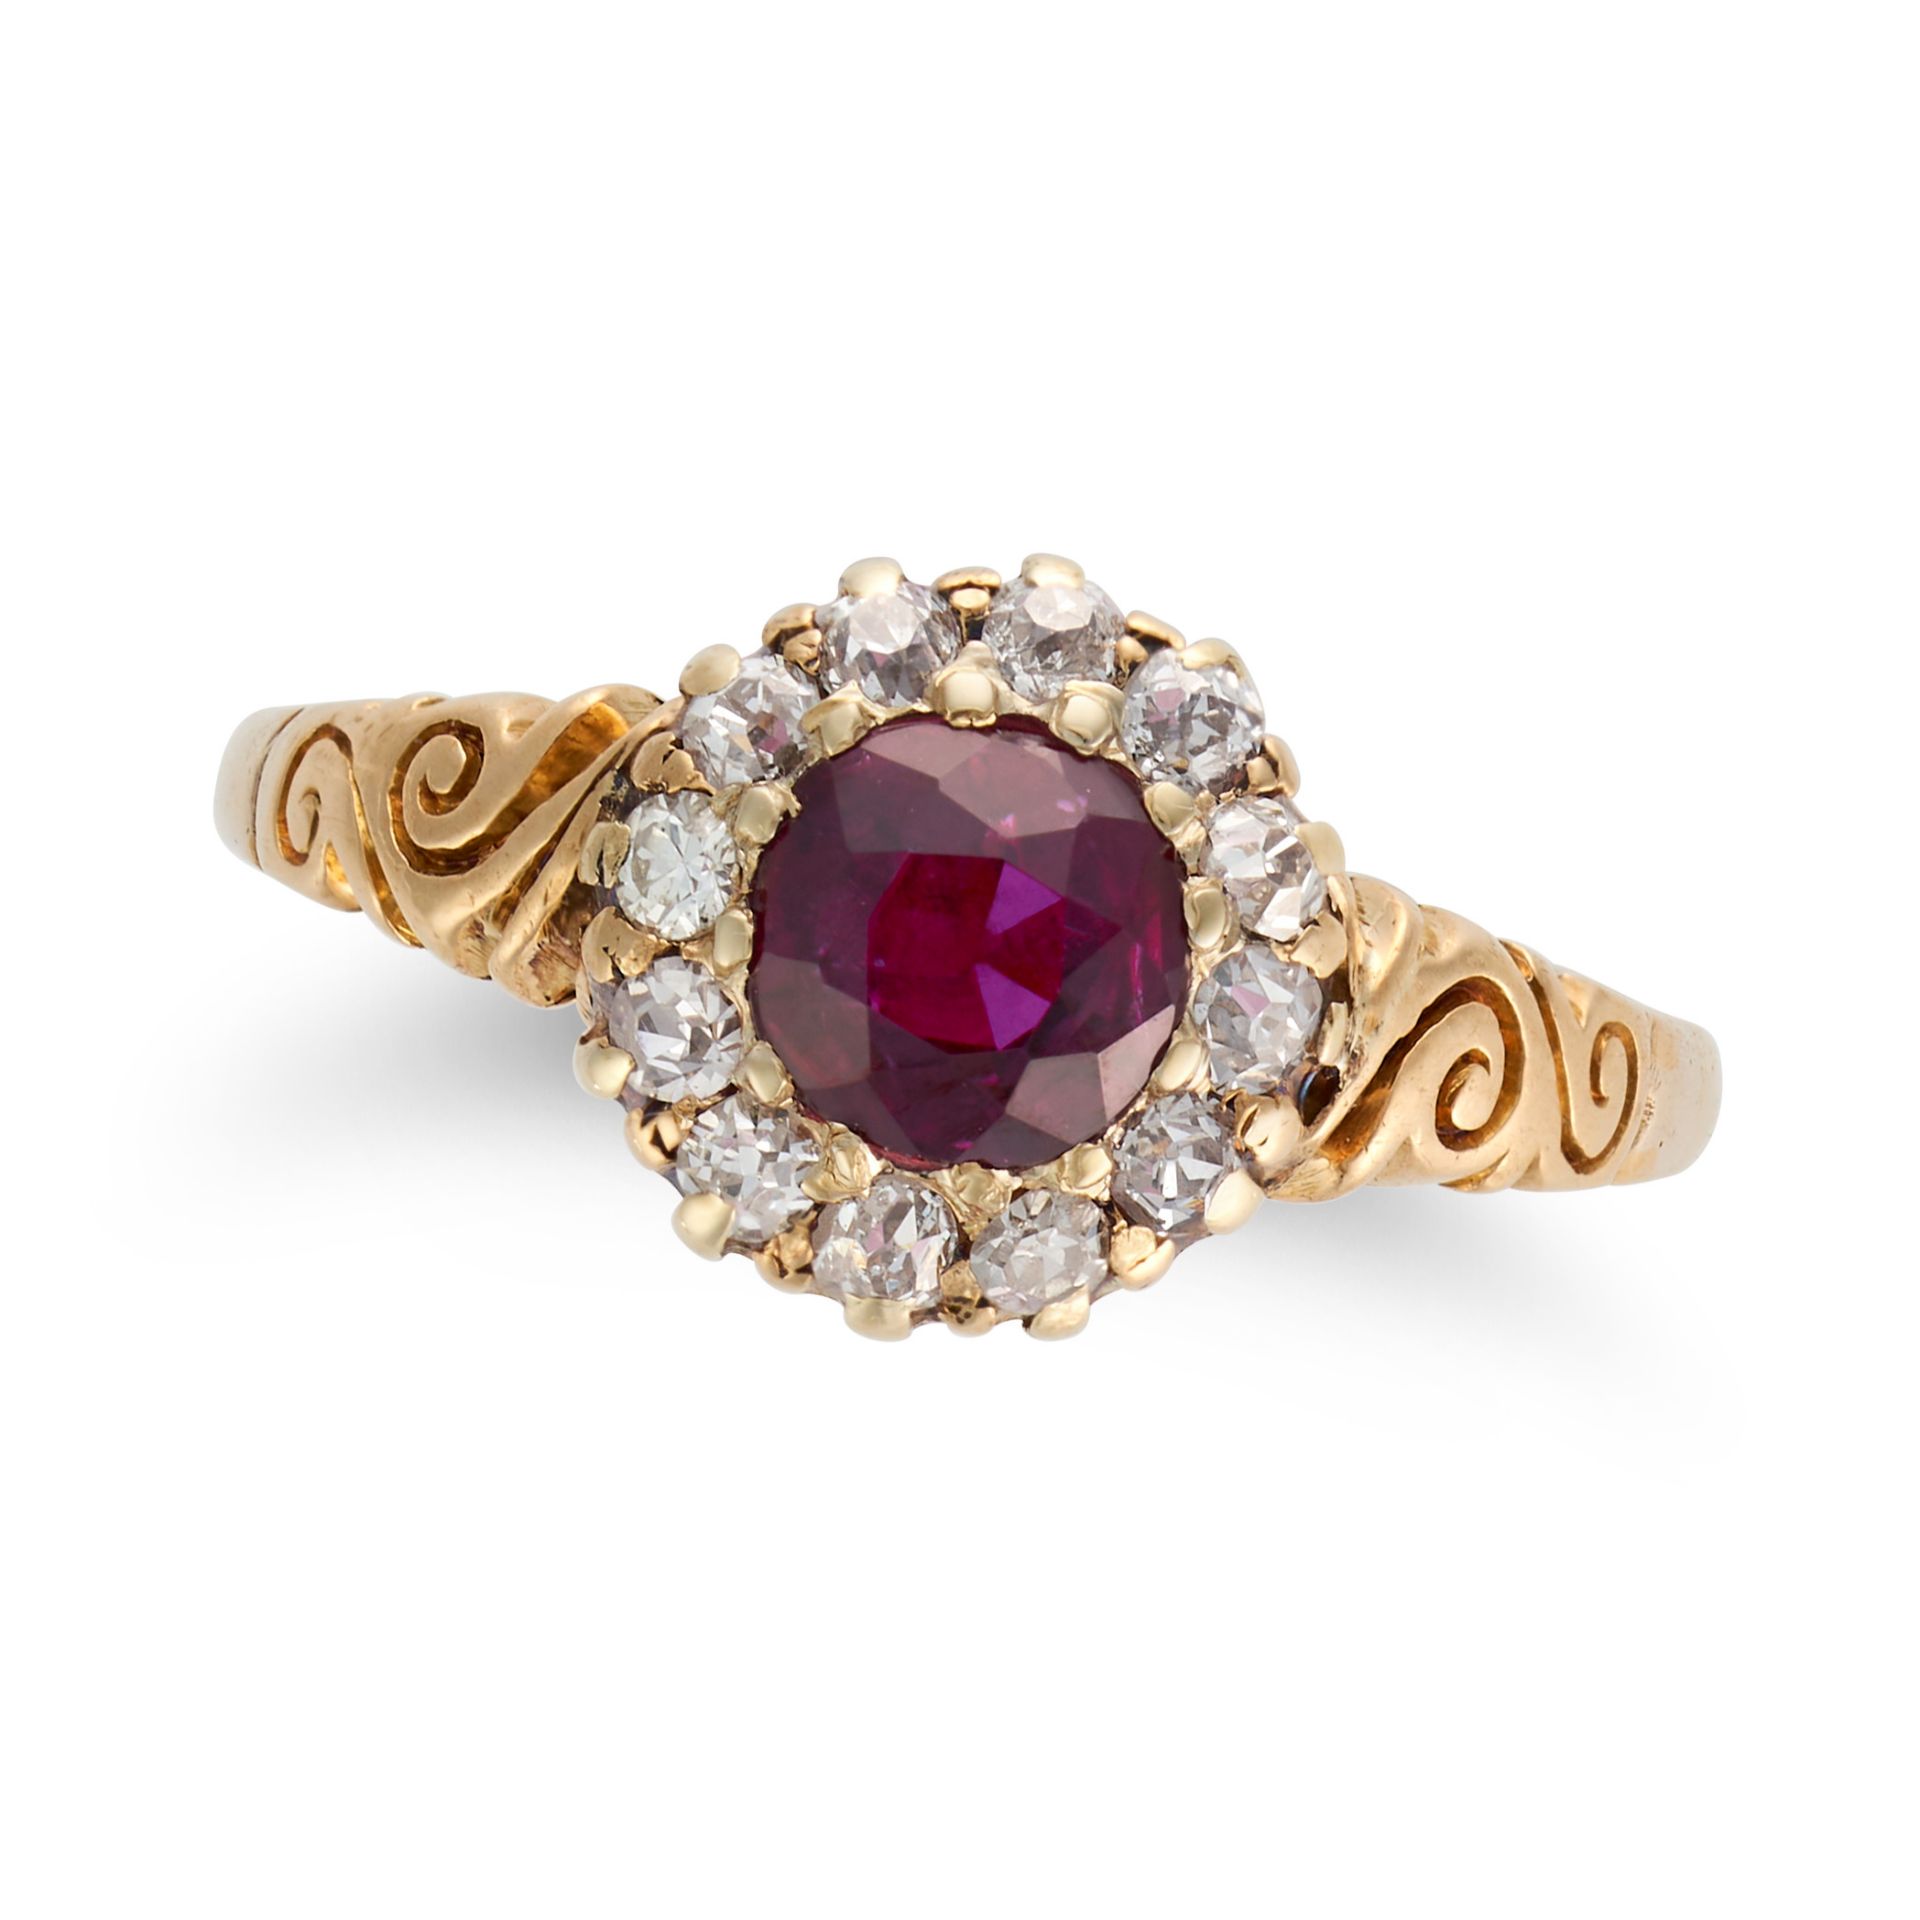 A RUBY AND DIAMOND CLUSTER RING set with a round cut ruby in a cluster of old and round cut diamo...